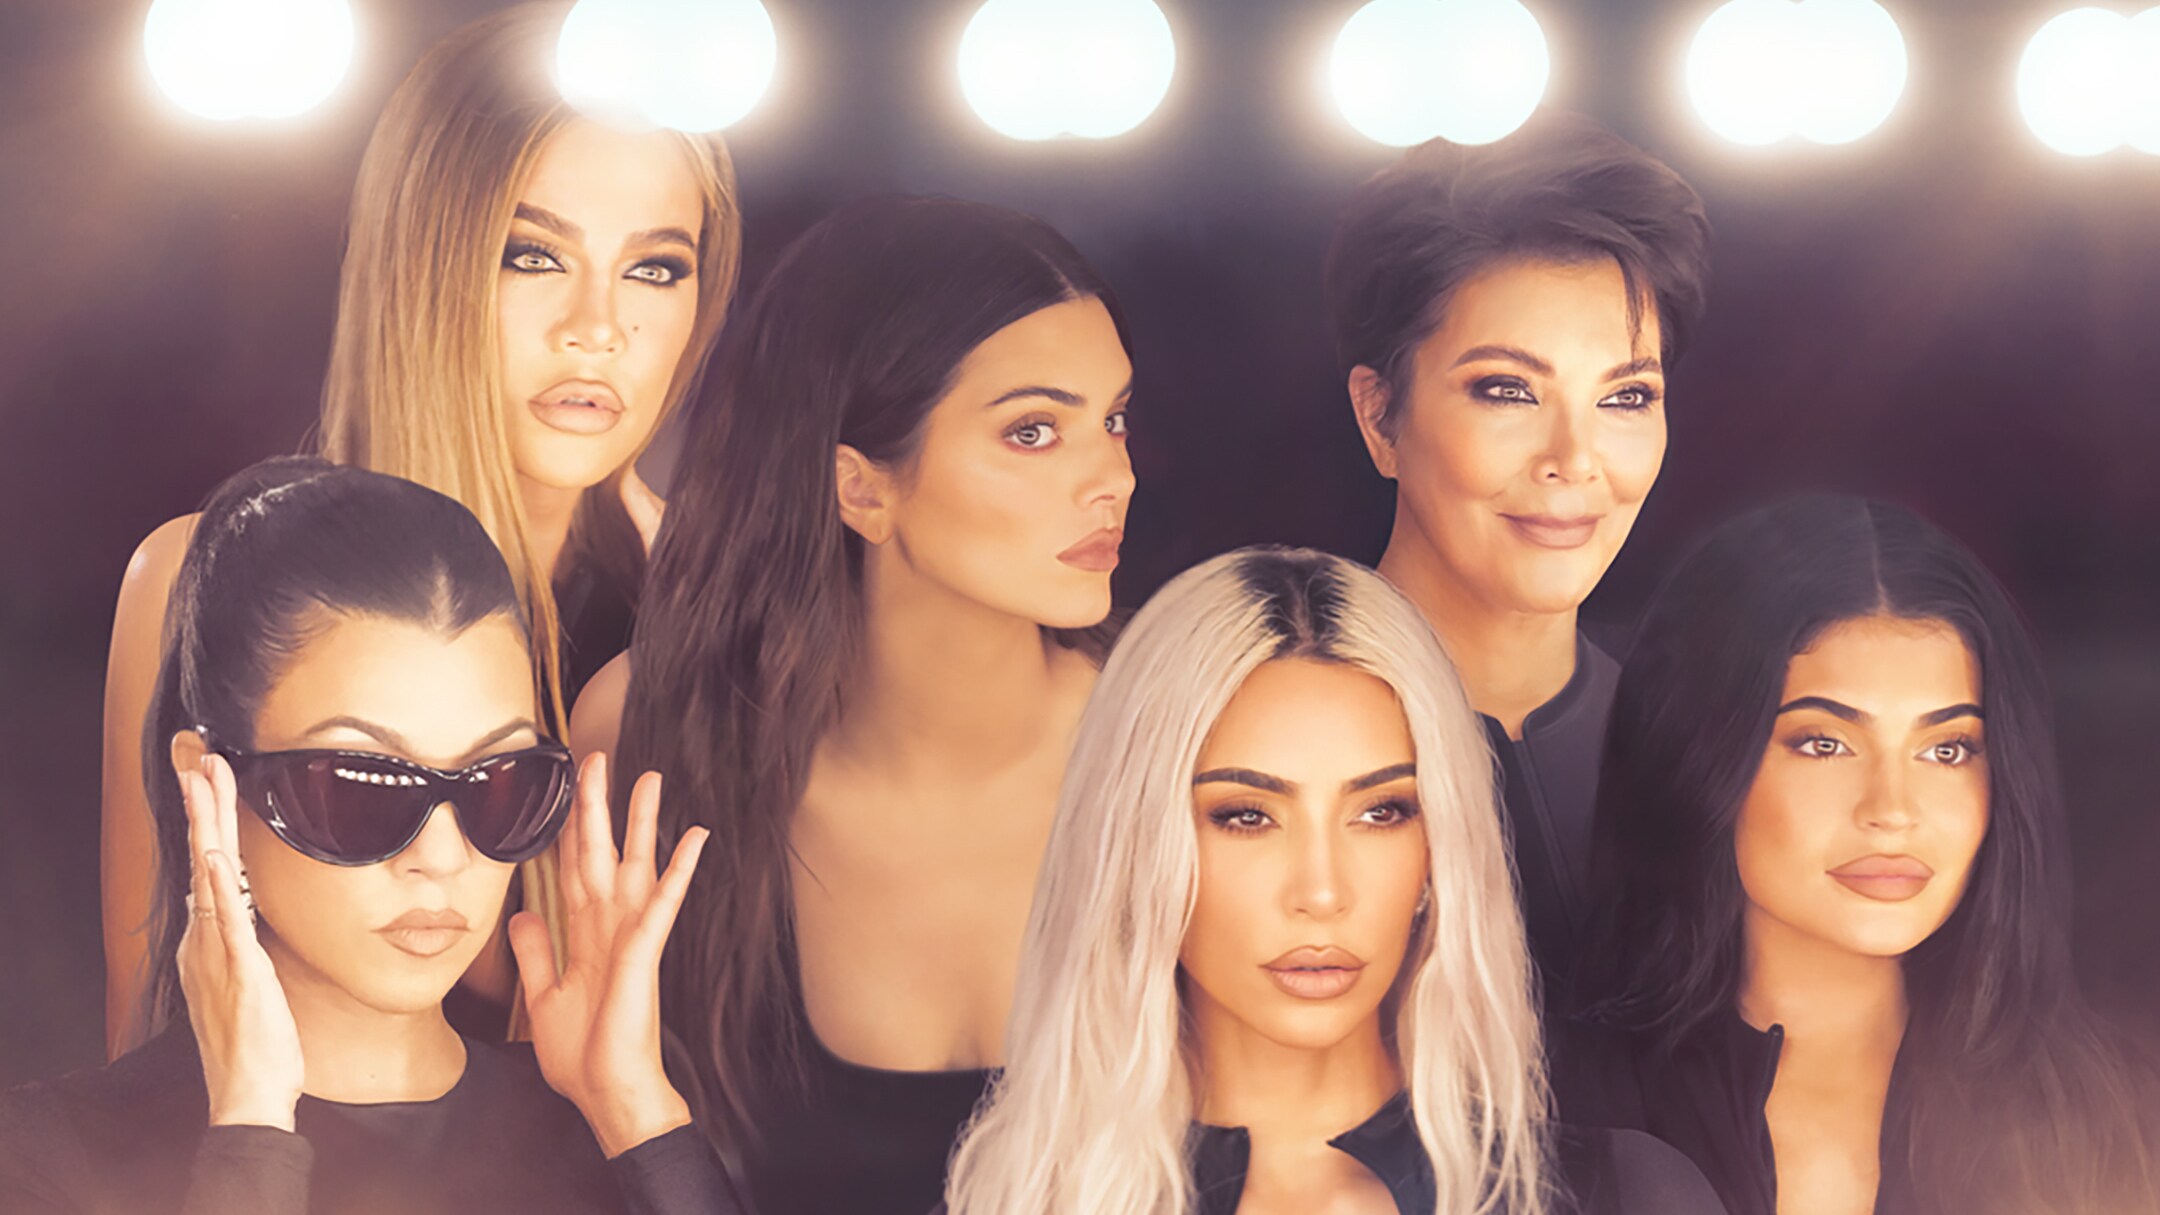 TRAILER AND KEY ART REVEALED FOR THE THIRD SEASON OF “THE KARDASHIANS,” PREMIERING MAY 25TH ON DISNEY+